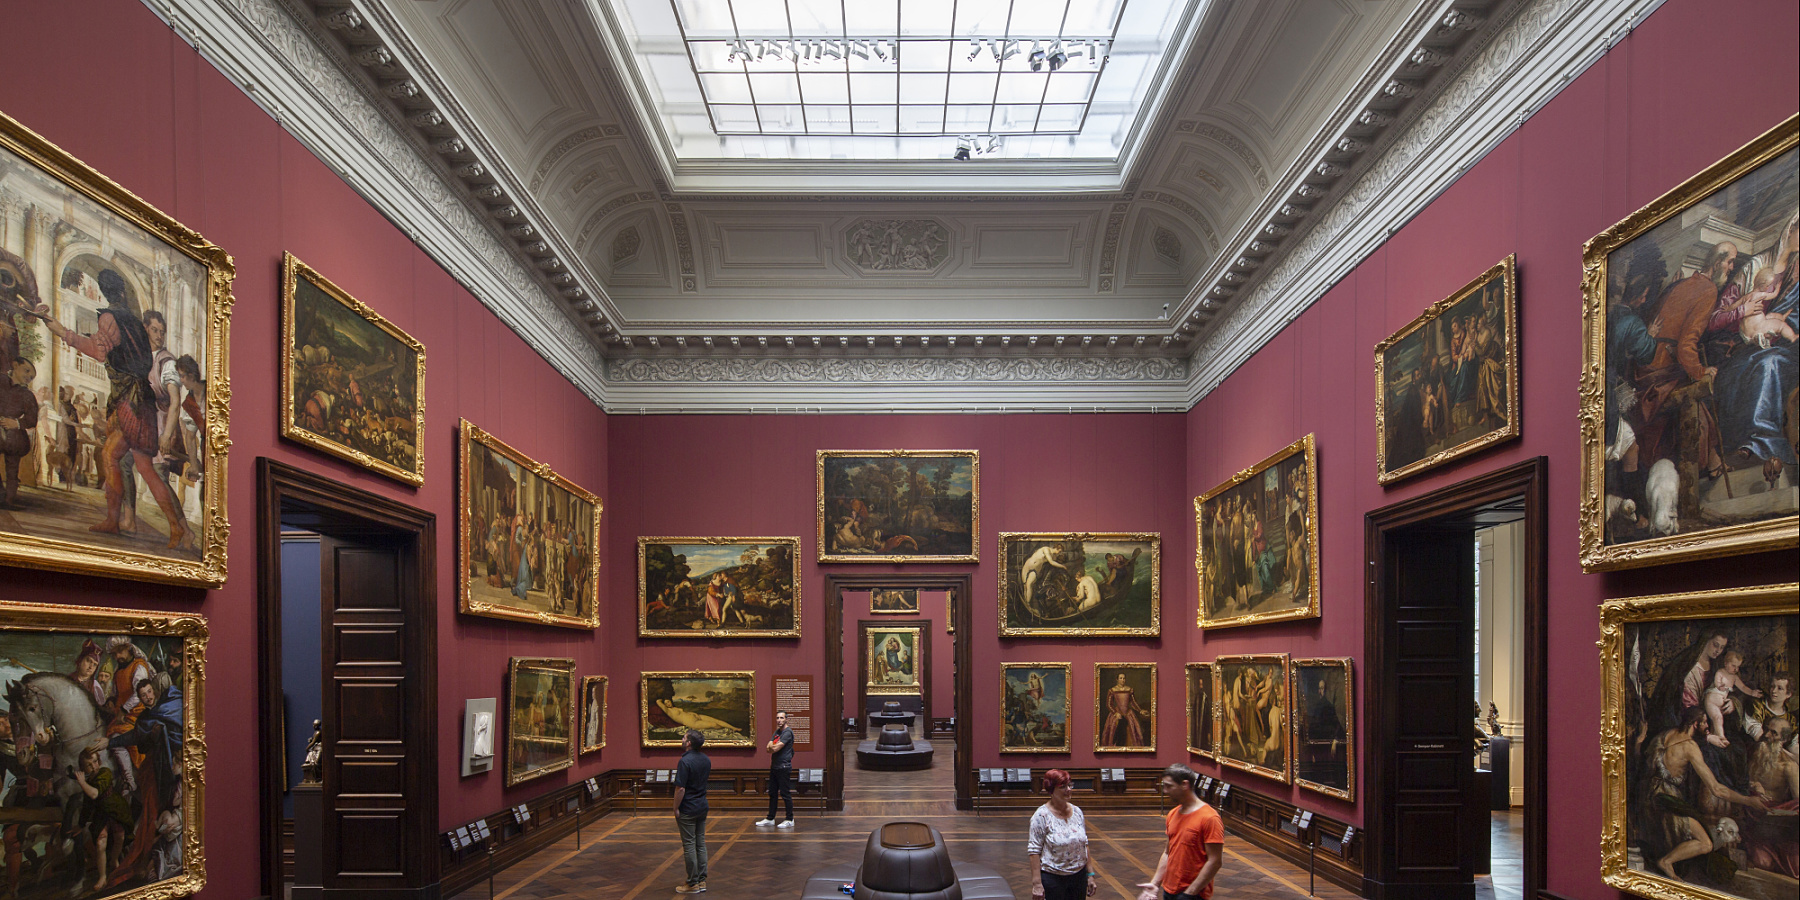 ERCO LED spotlights in the Old Masters Picture Gallery, Dresden, Germany